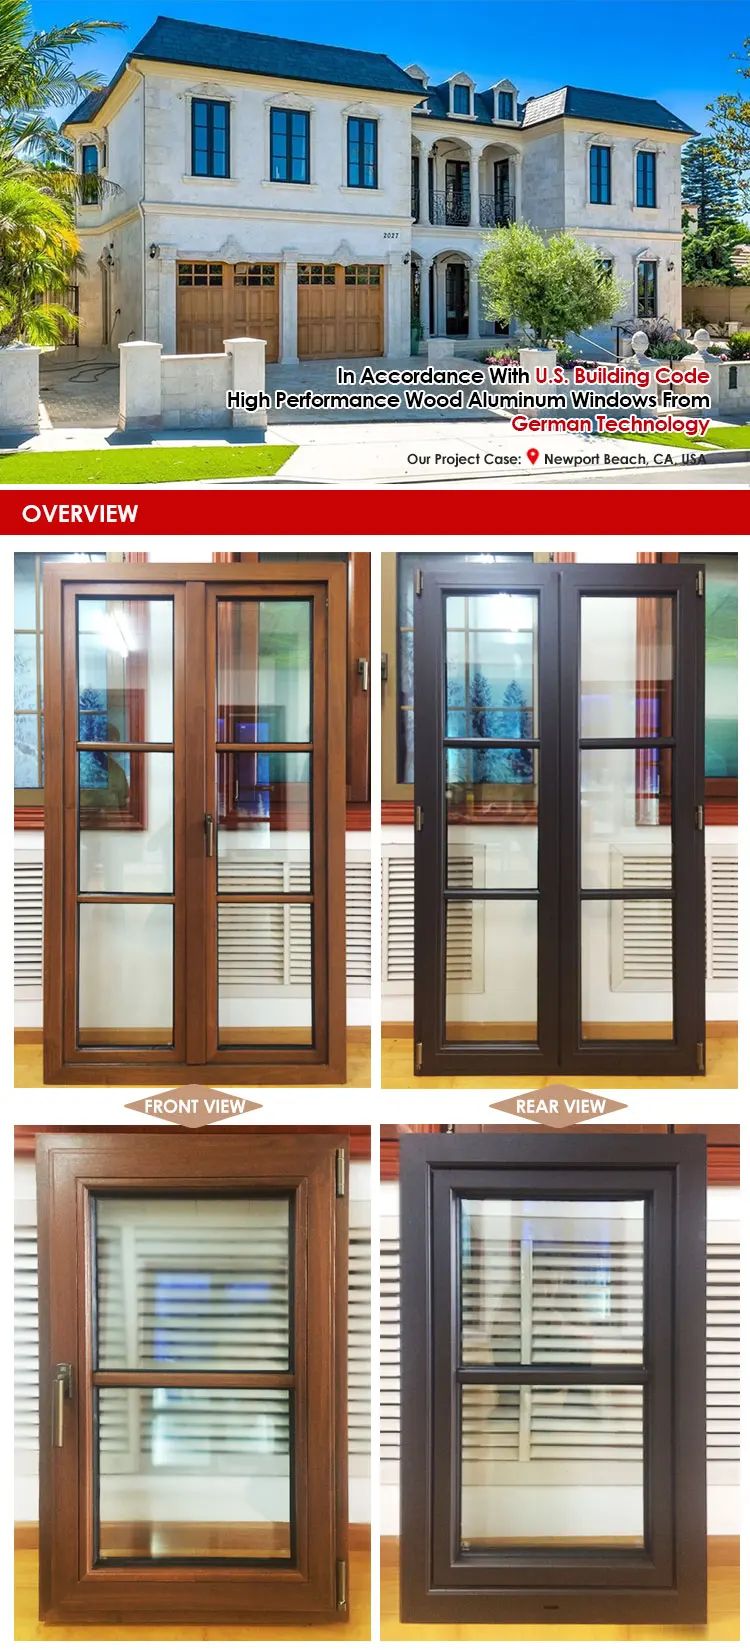 Doorwin newest french window grill design with different glass dimensions